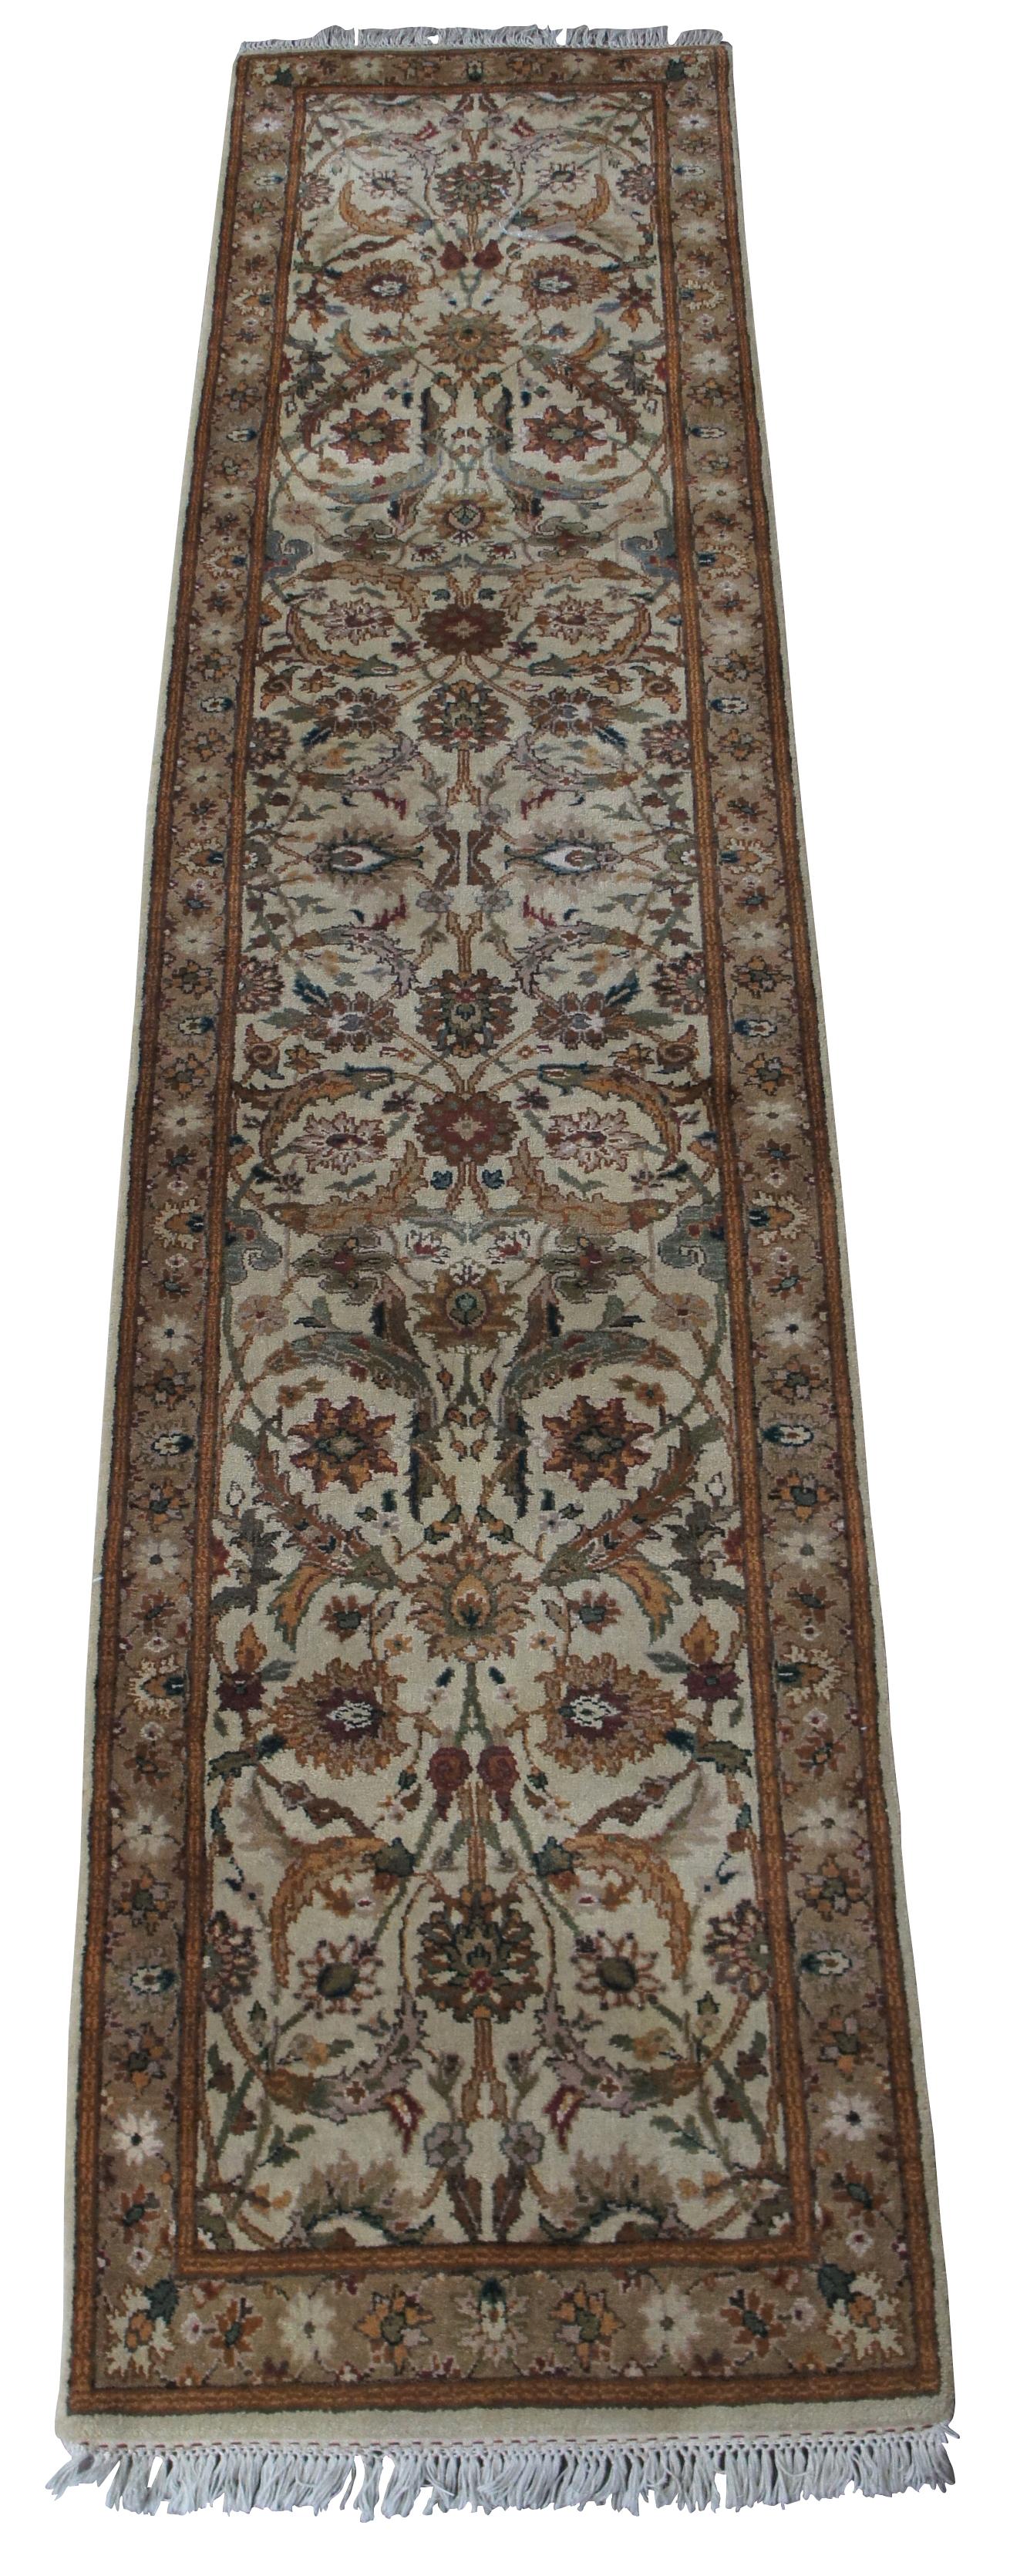 Vintage machine made rug runner featuring floral all over designs with grey, green, brown, blues, tan/beige and green. Measures: 3 x 12.
  